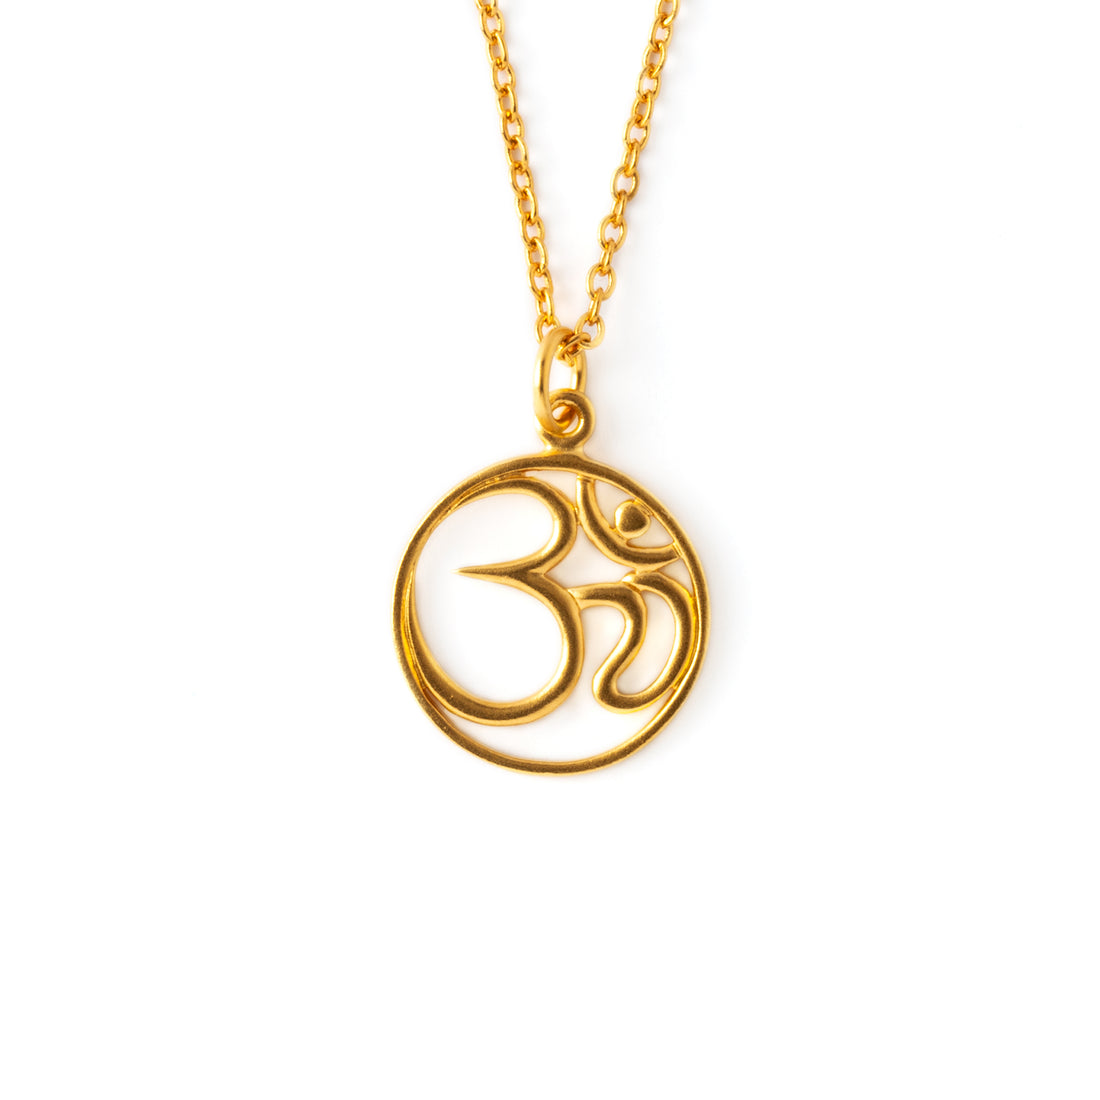 Gold Om stamp necklace on a chain frontal view